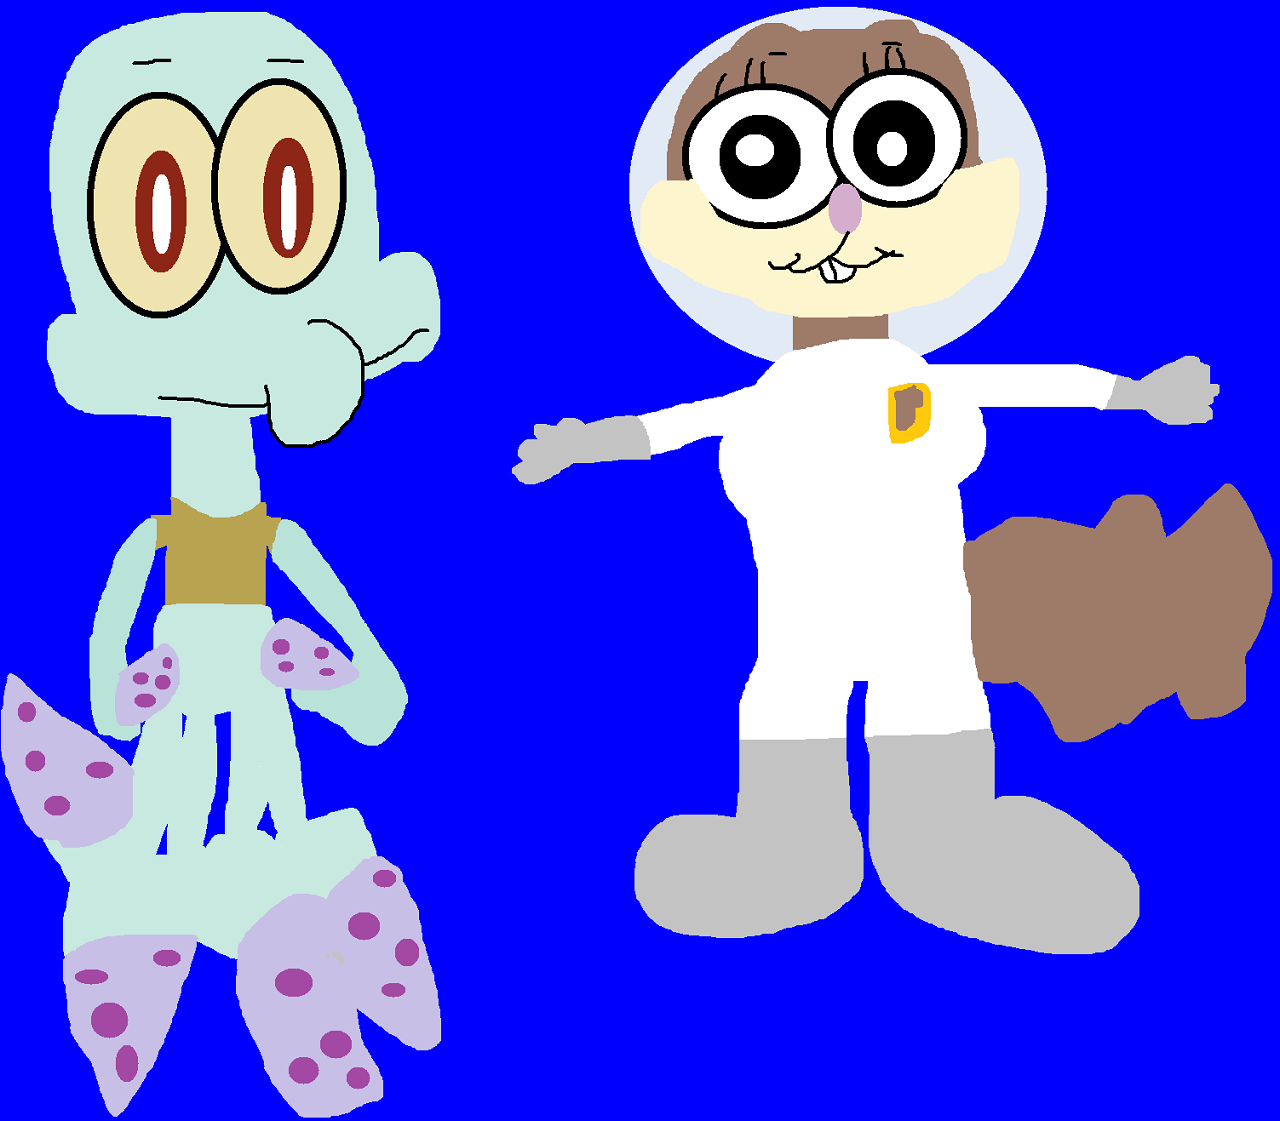 Squidward And Sandy Small Cheebs by Falconlobo